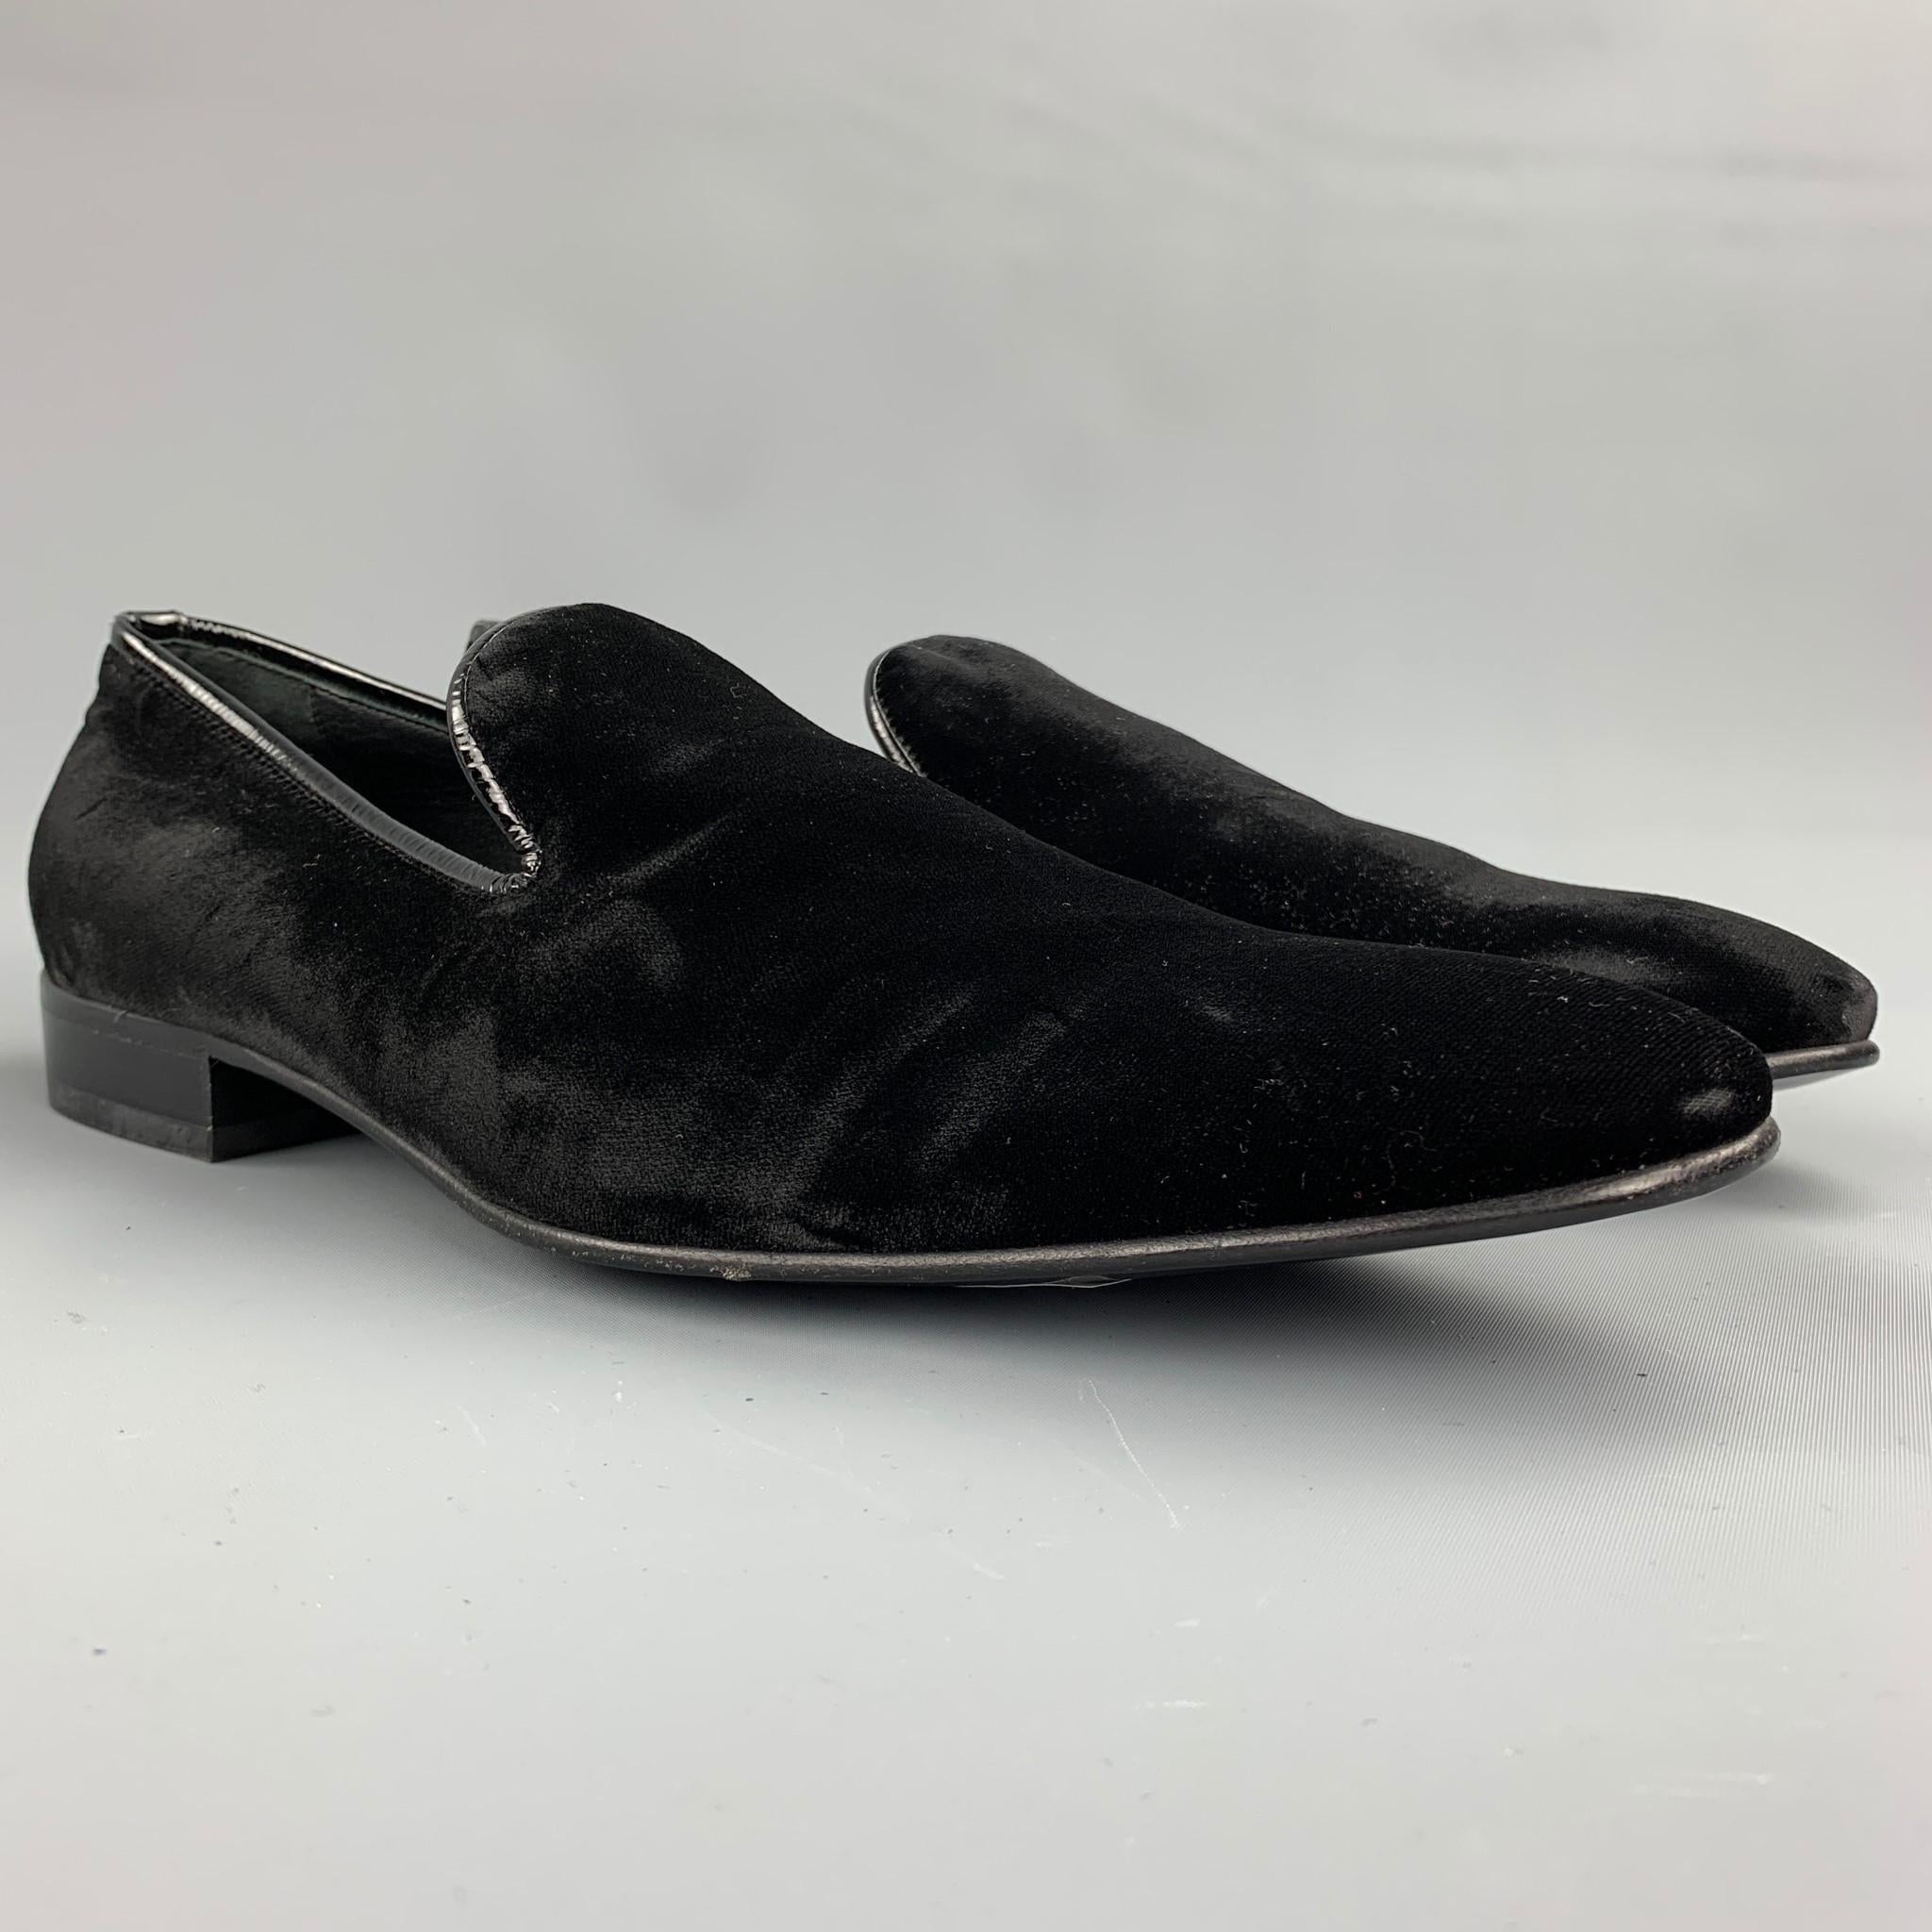 SALVATORE FERRAGAMO loafer comes in a black velvet featuring a slip on style and a wooden sole. Made in Italy.

Very Good Pre-Owned Condition.
Marked: 11 D

Outsole:

12.5 in. x 4 in. 